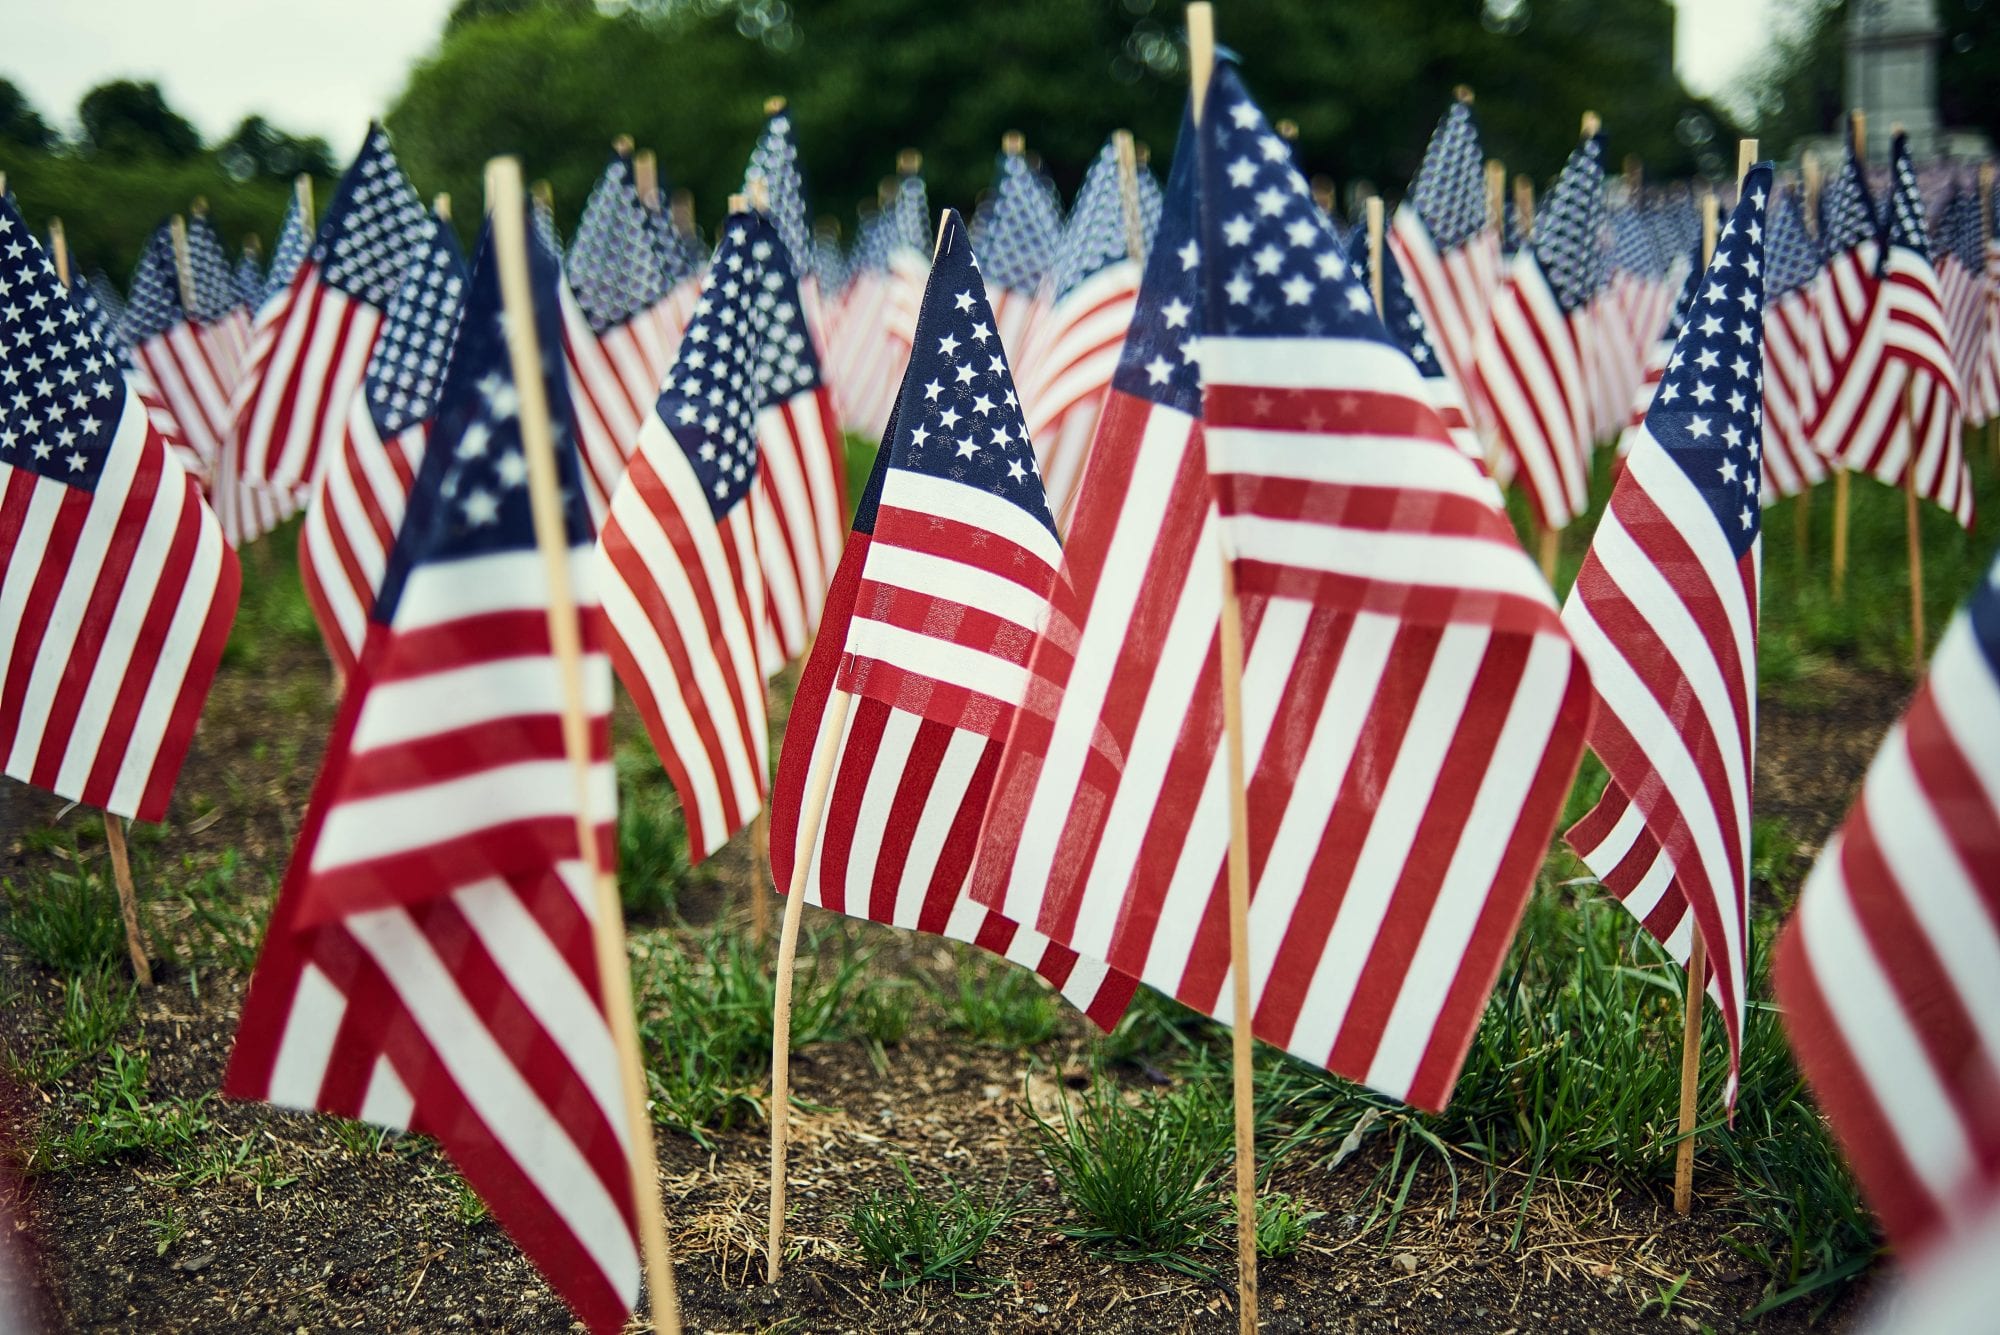 Quotes to show appreciation on Memorial Day perfect Instagram captions